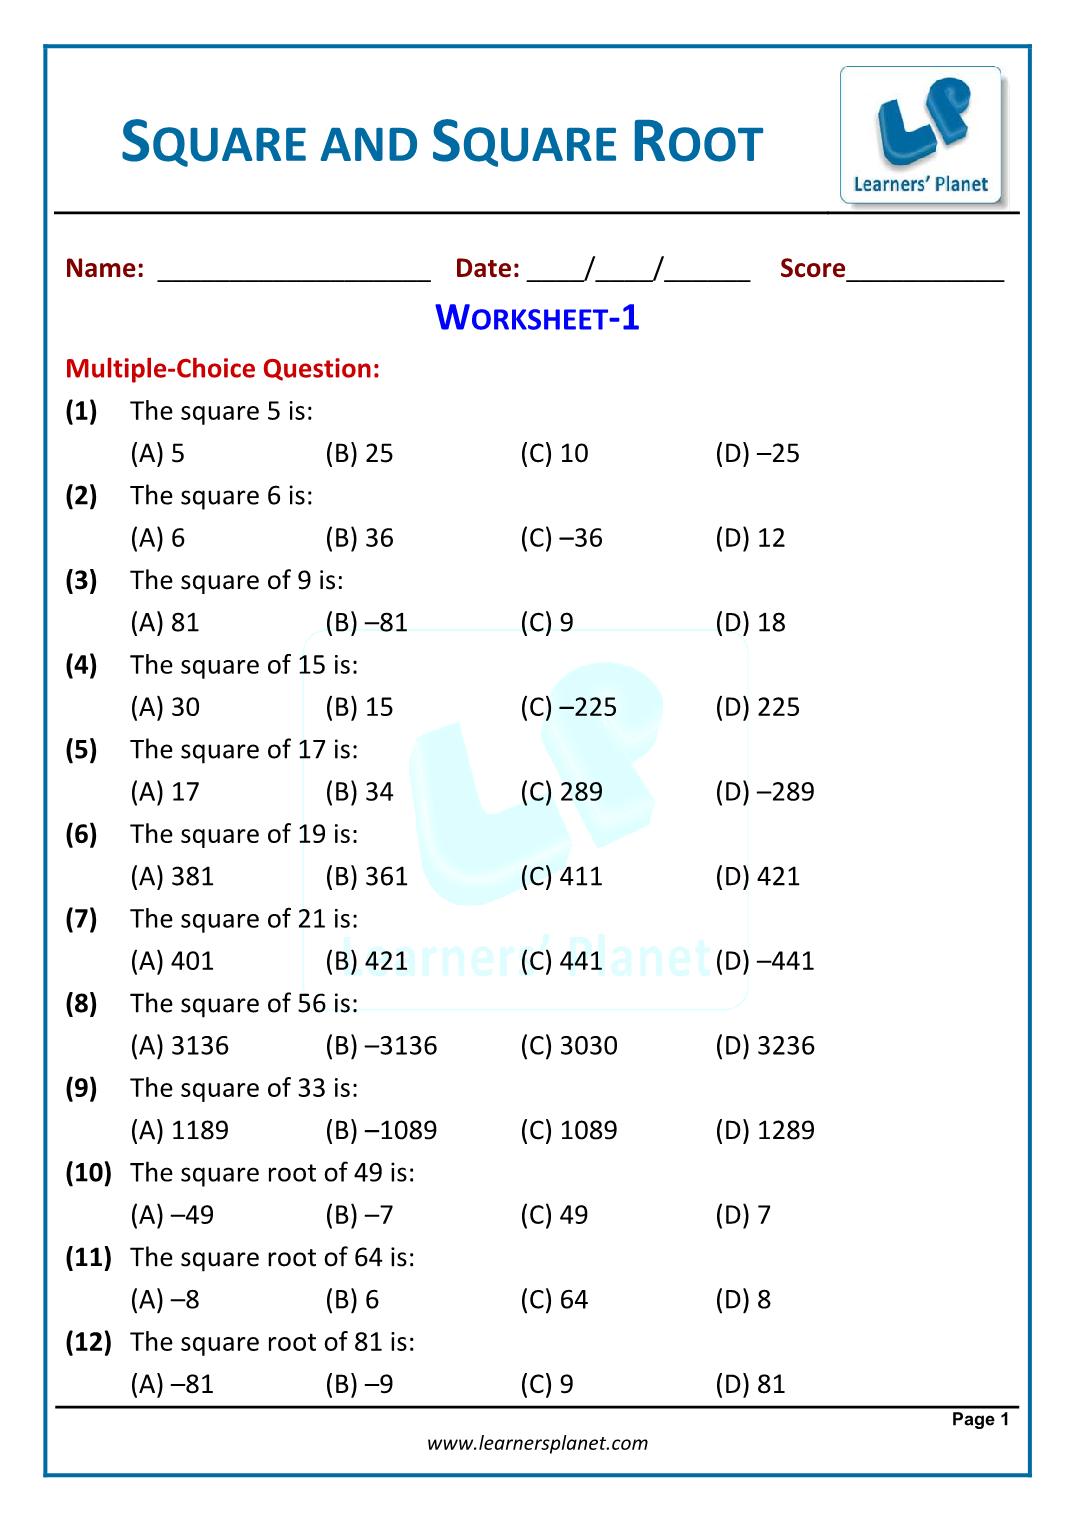 NCERT grade viii math squares and square roots videos, quiz In Square Root Worksheet Pdf